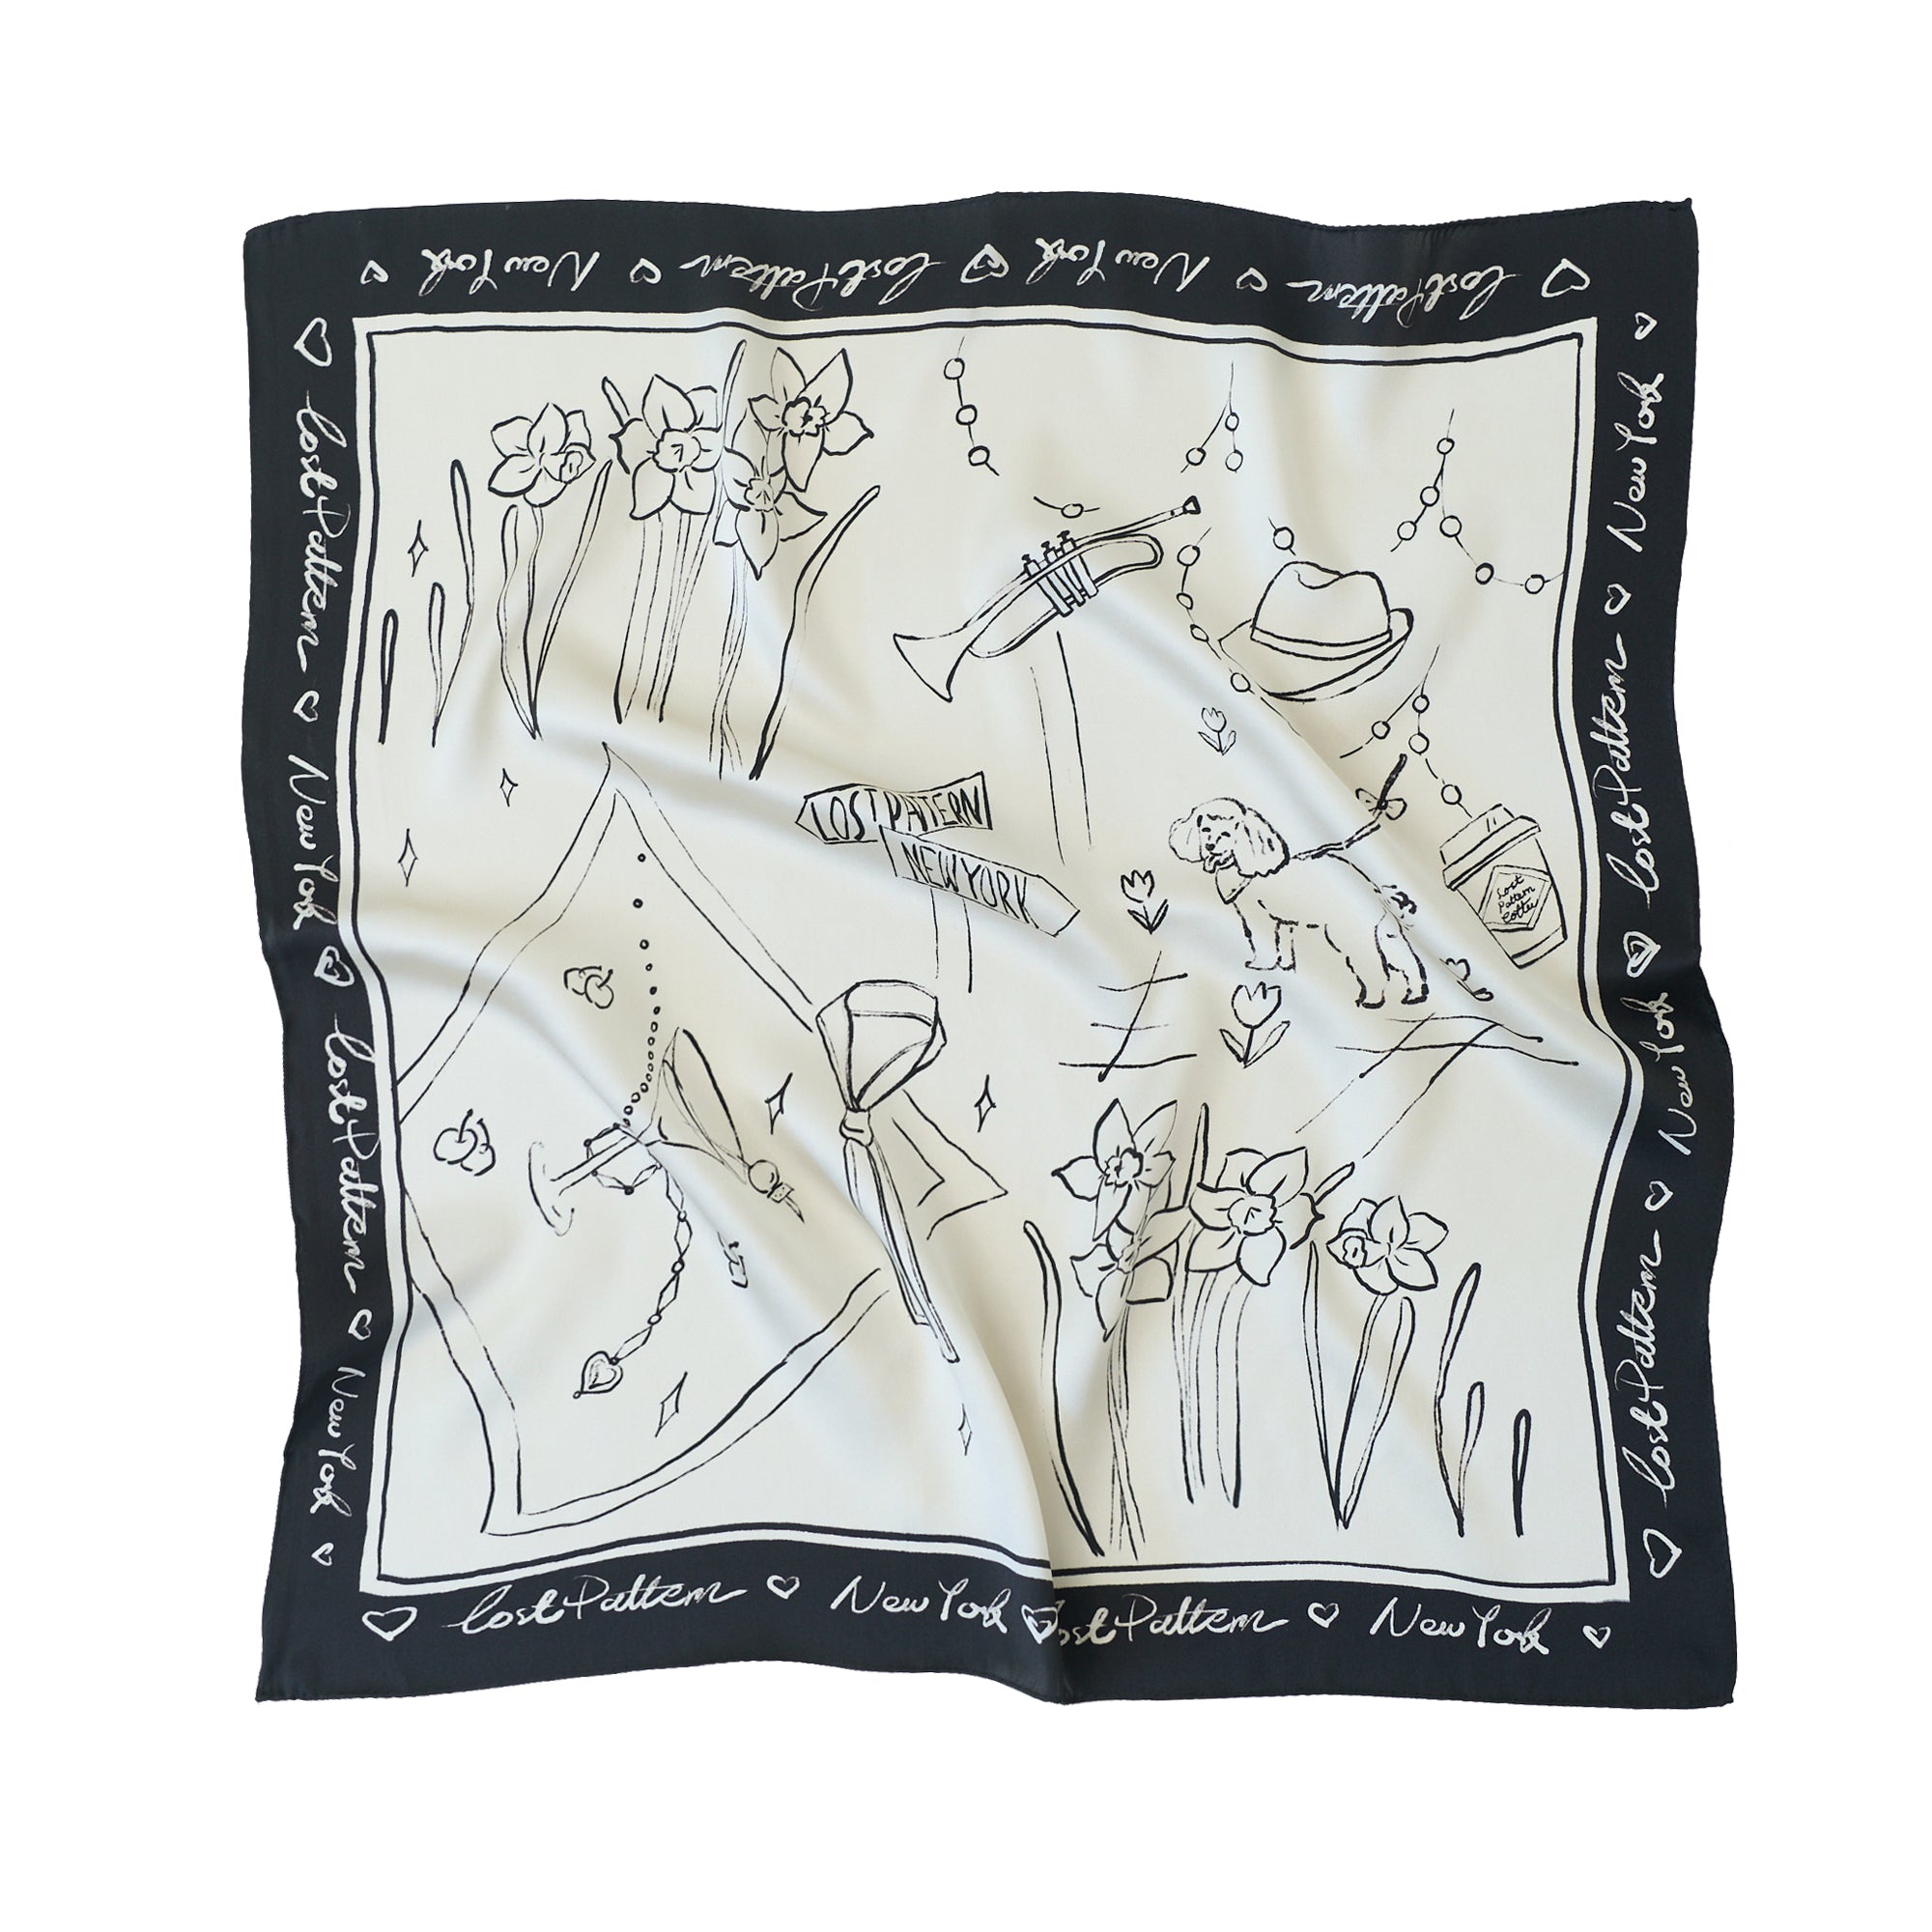 New York in Sketches Silk Scarf  Black and White scarf – LOST PATTERN